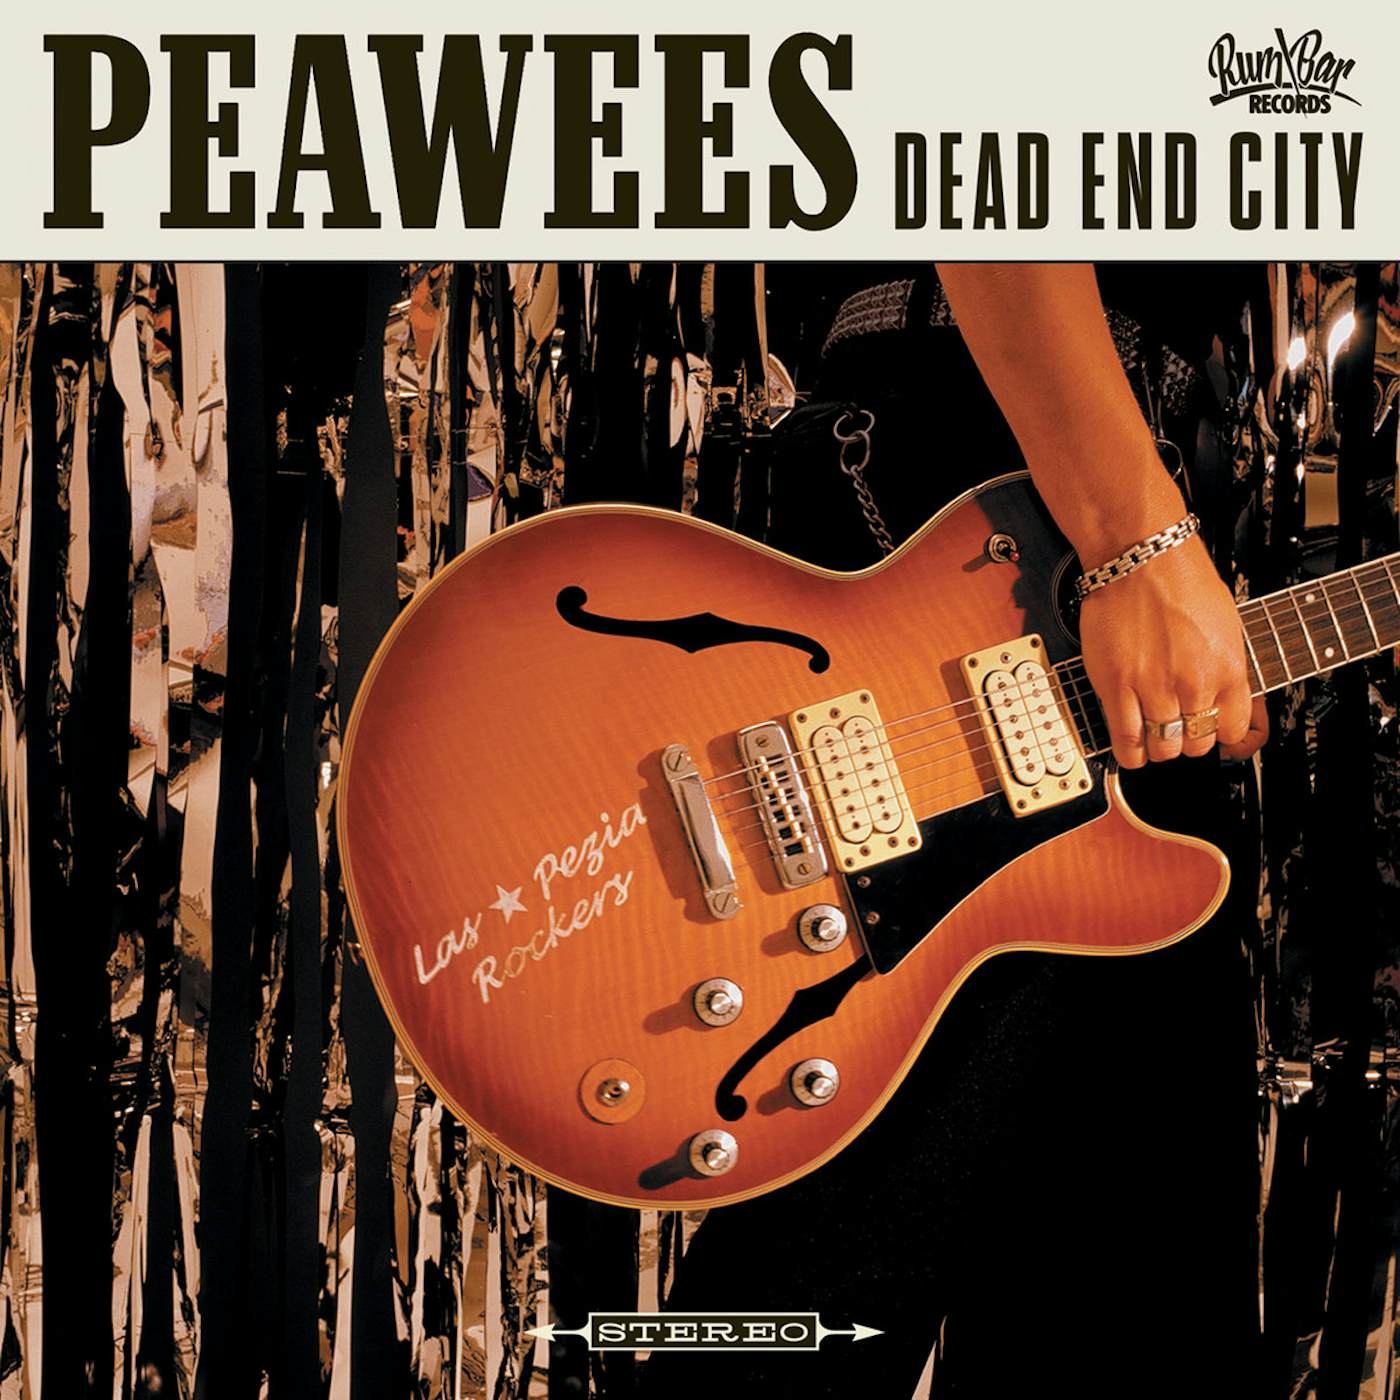 The Peawees DEAD END CITY CD